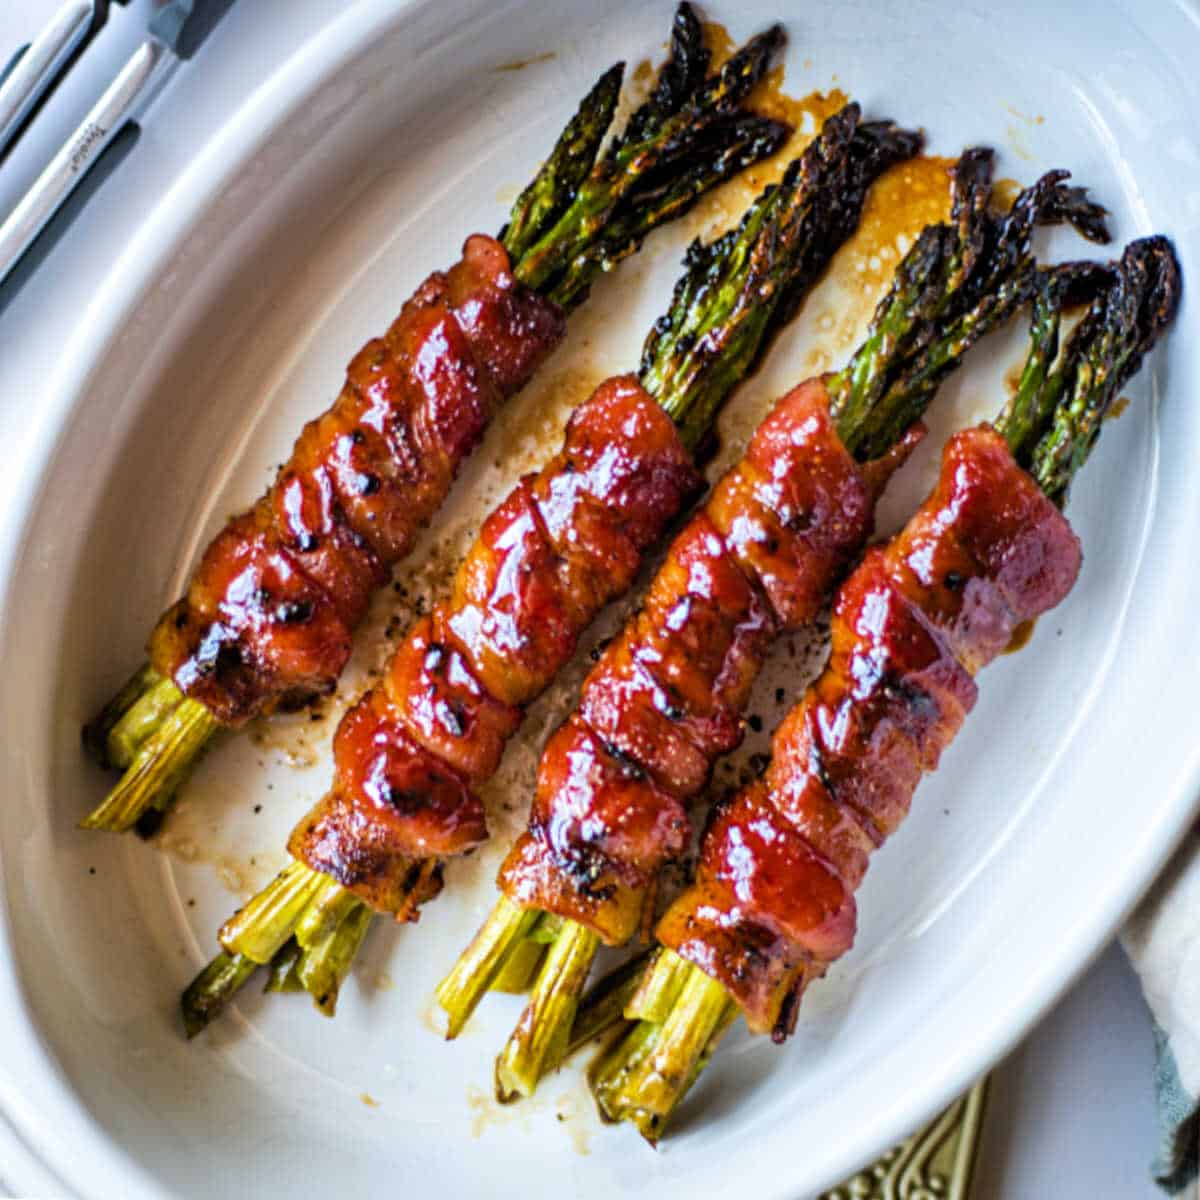 Asparagus Wrapped in Bacon